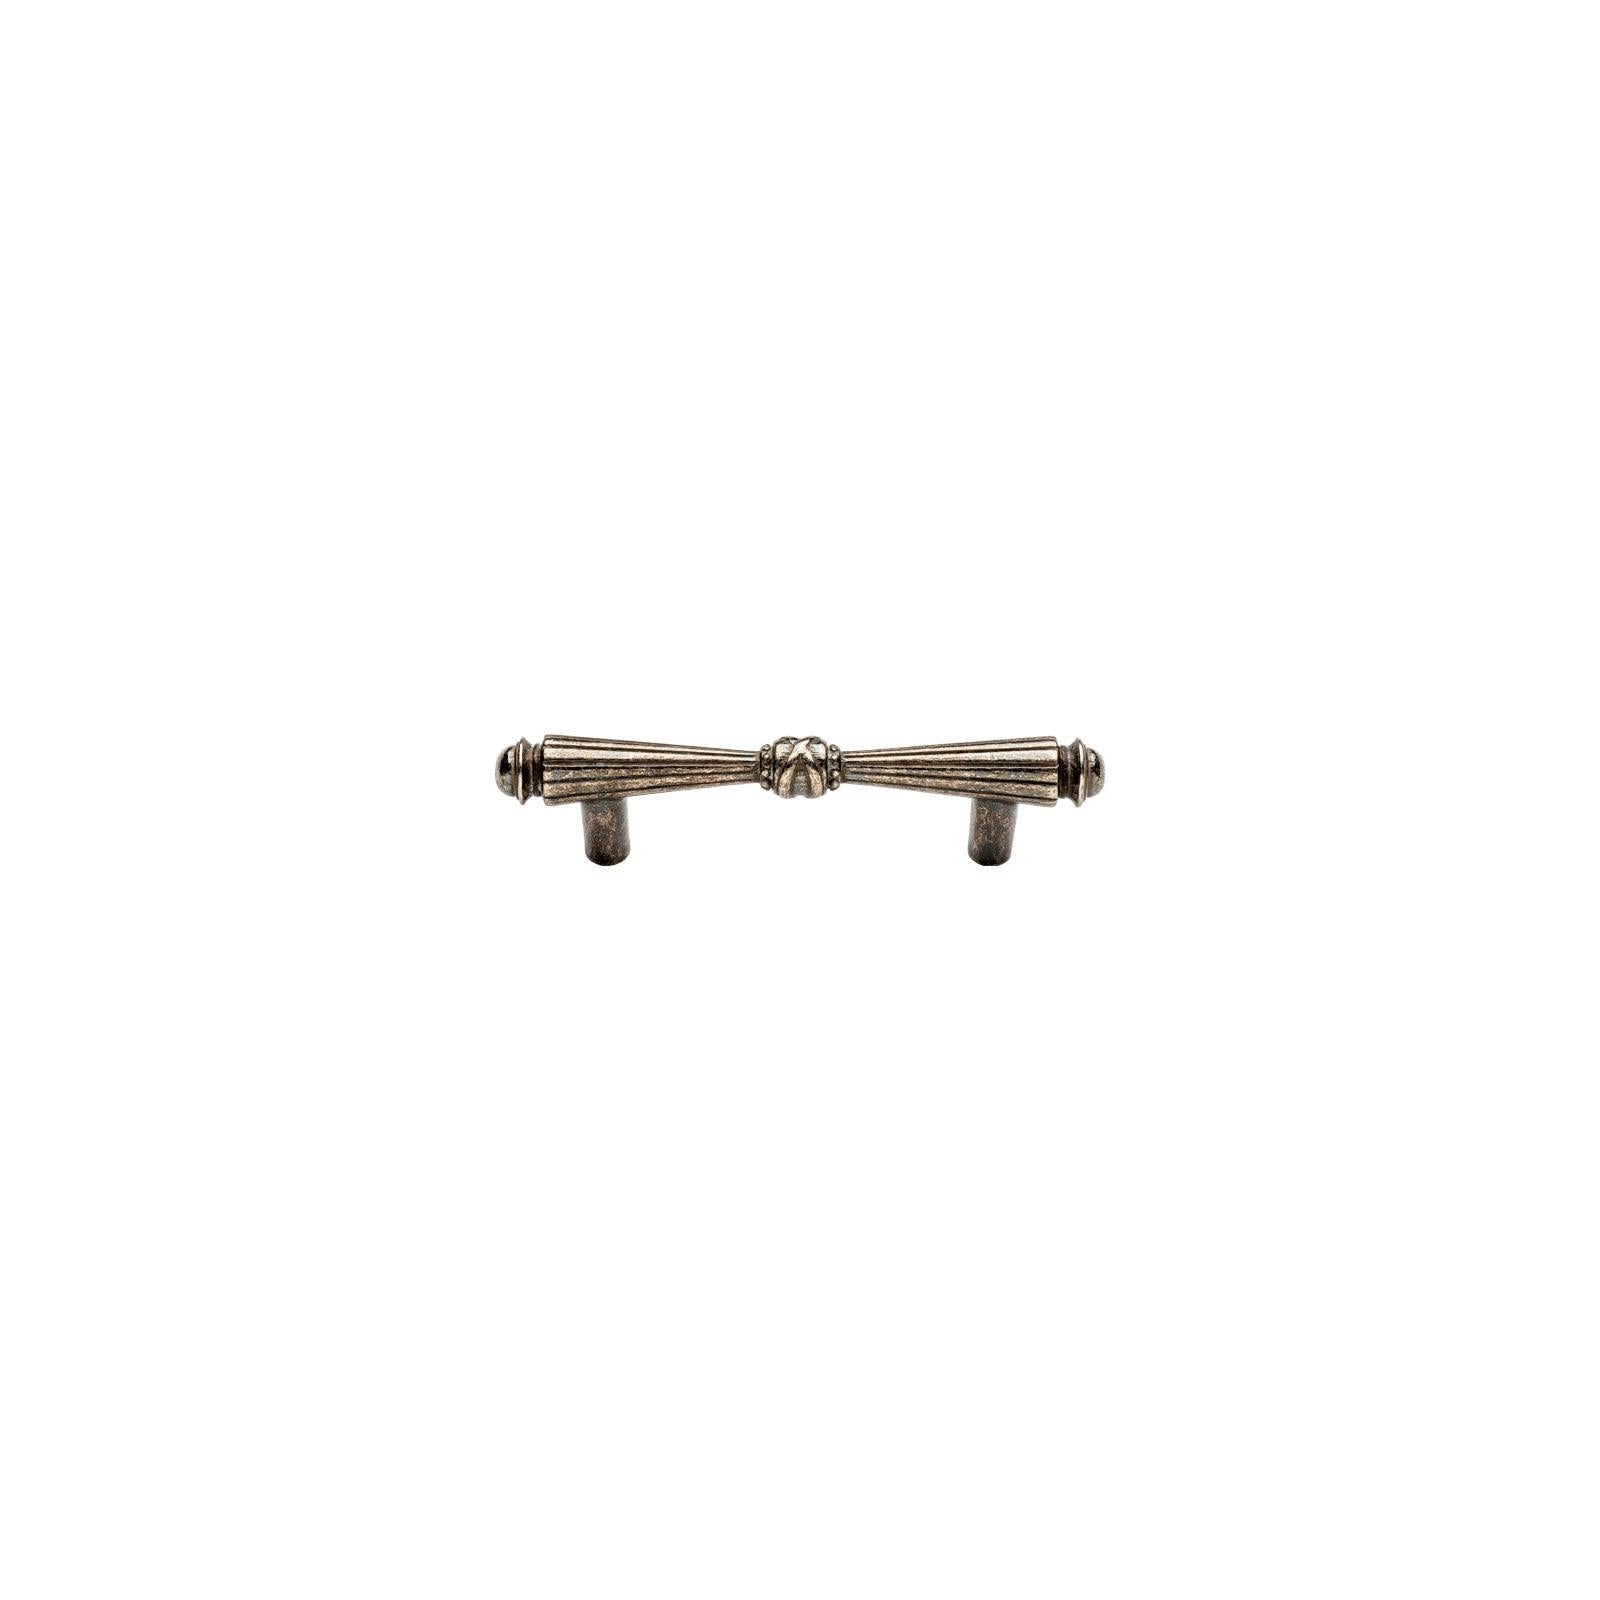 CK503 - 3" C-to-C Tuxedo Cabinet Pull - {{ show.name }}